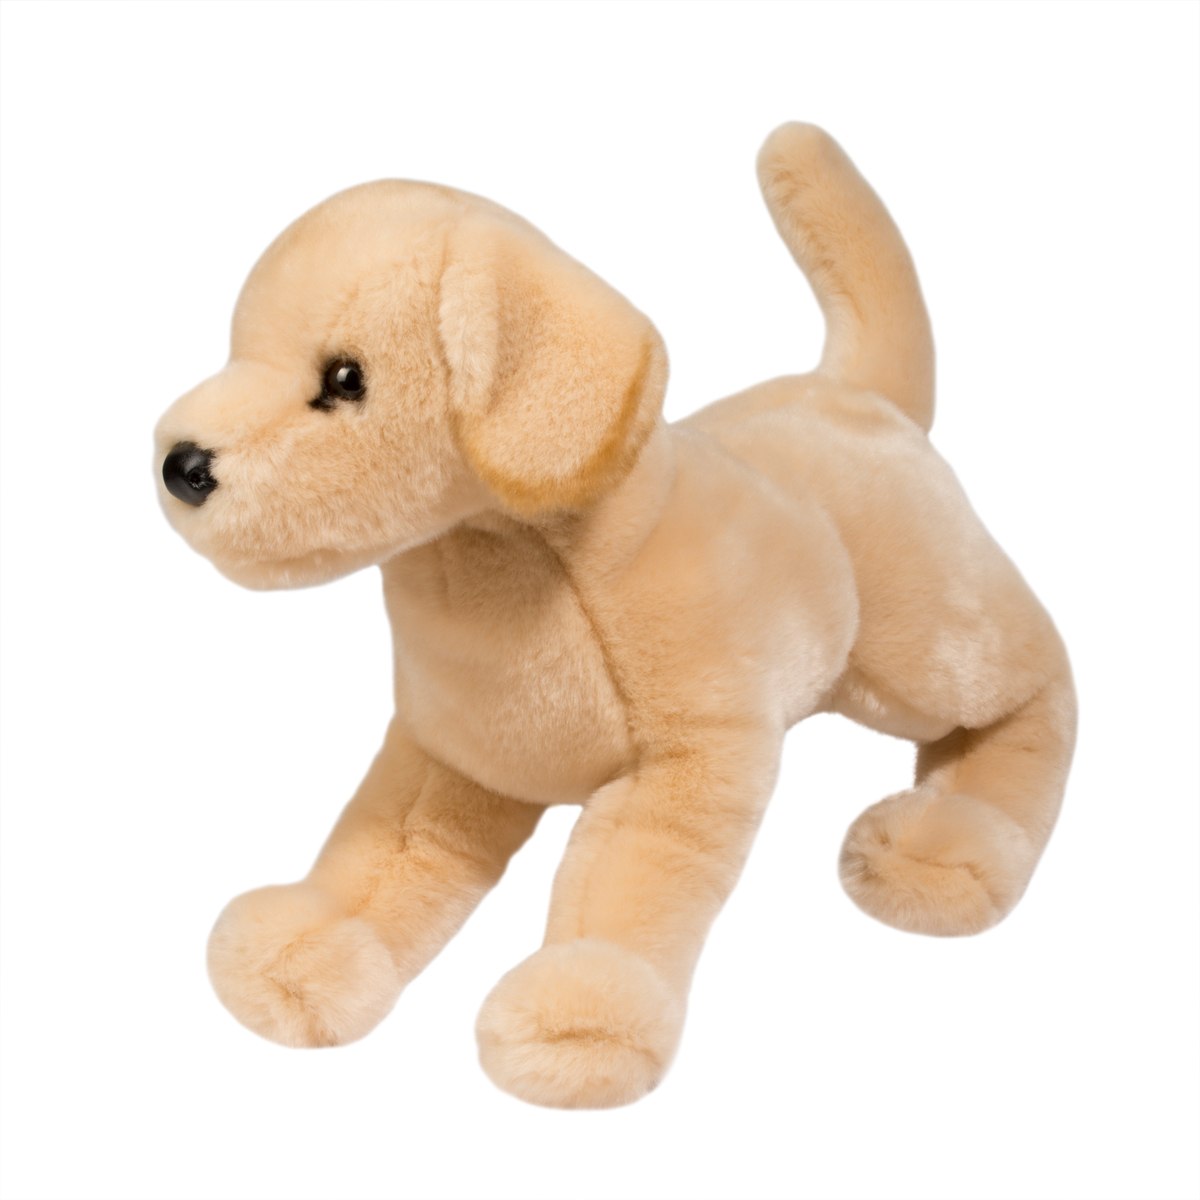 Douglas Mandy Yellow Lab Plush Cuddle Toy 1804 Stuffed Puppy Dog 12in Cabelas for sale online 